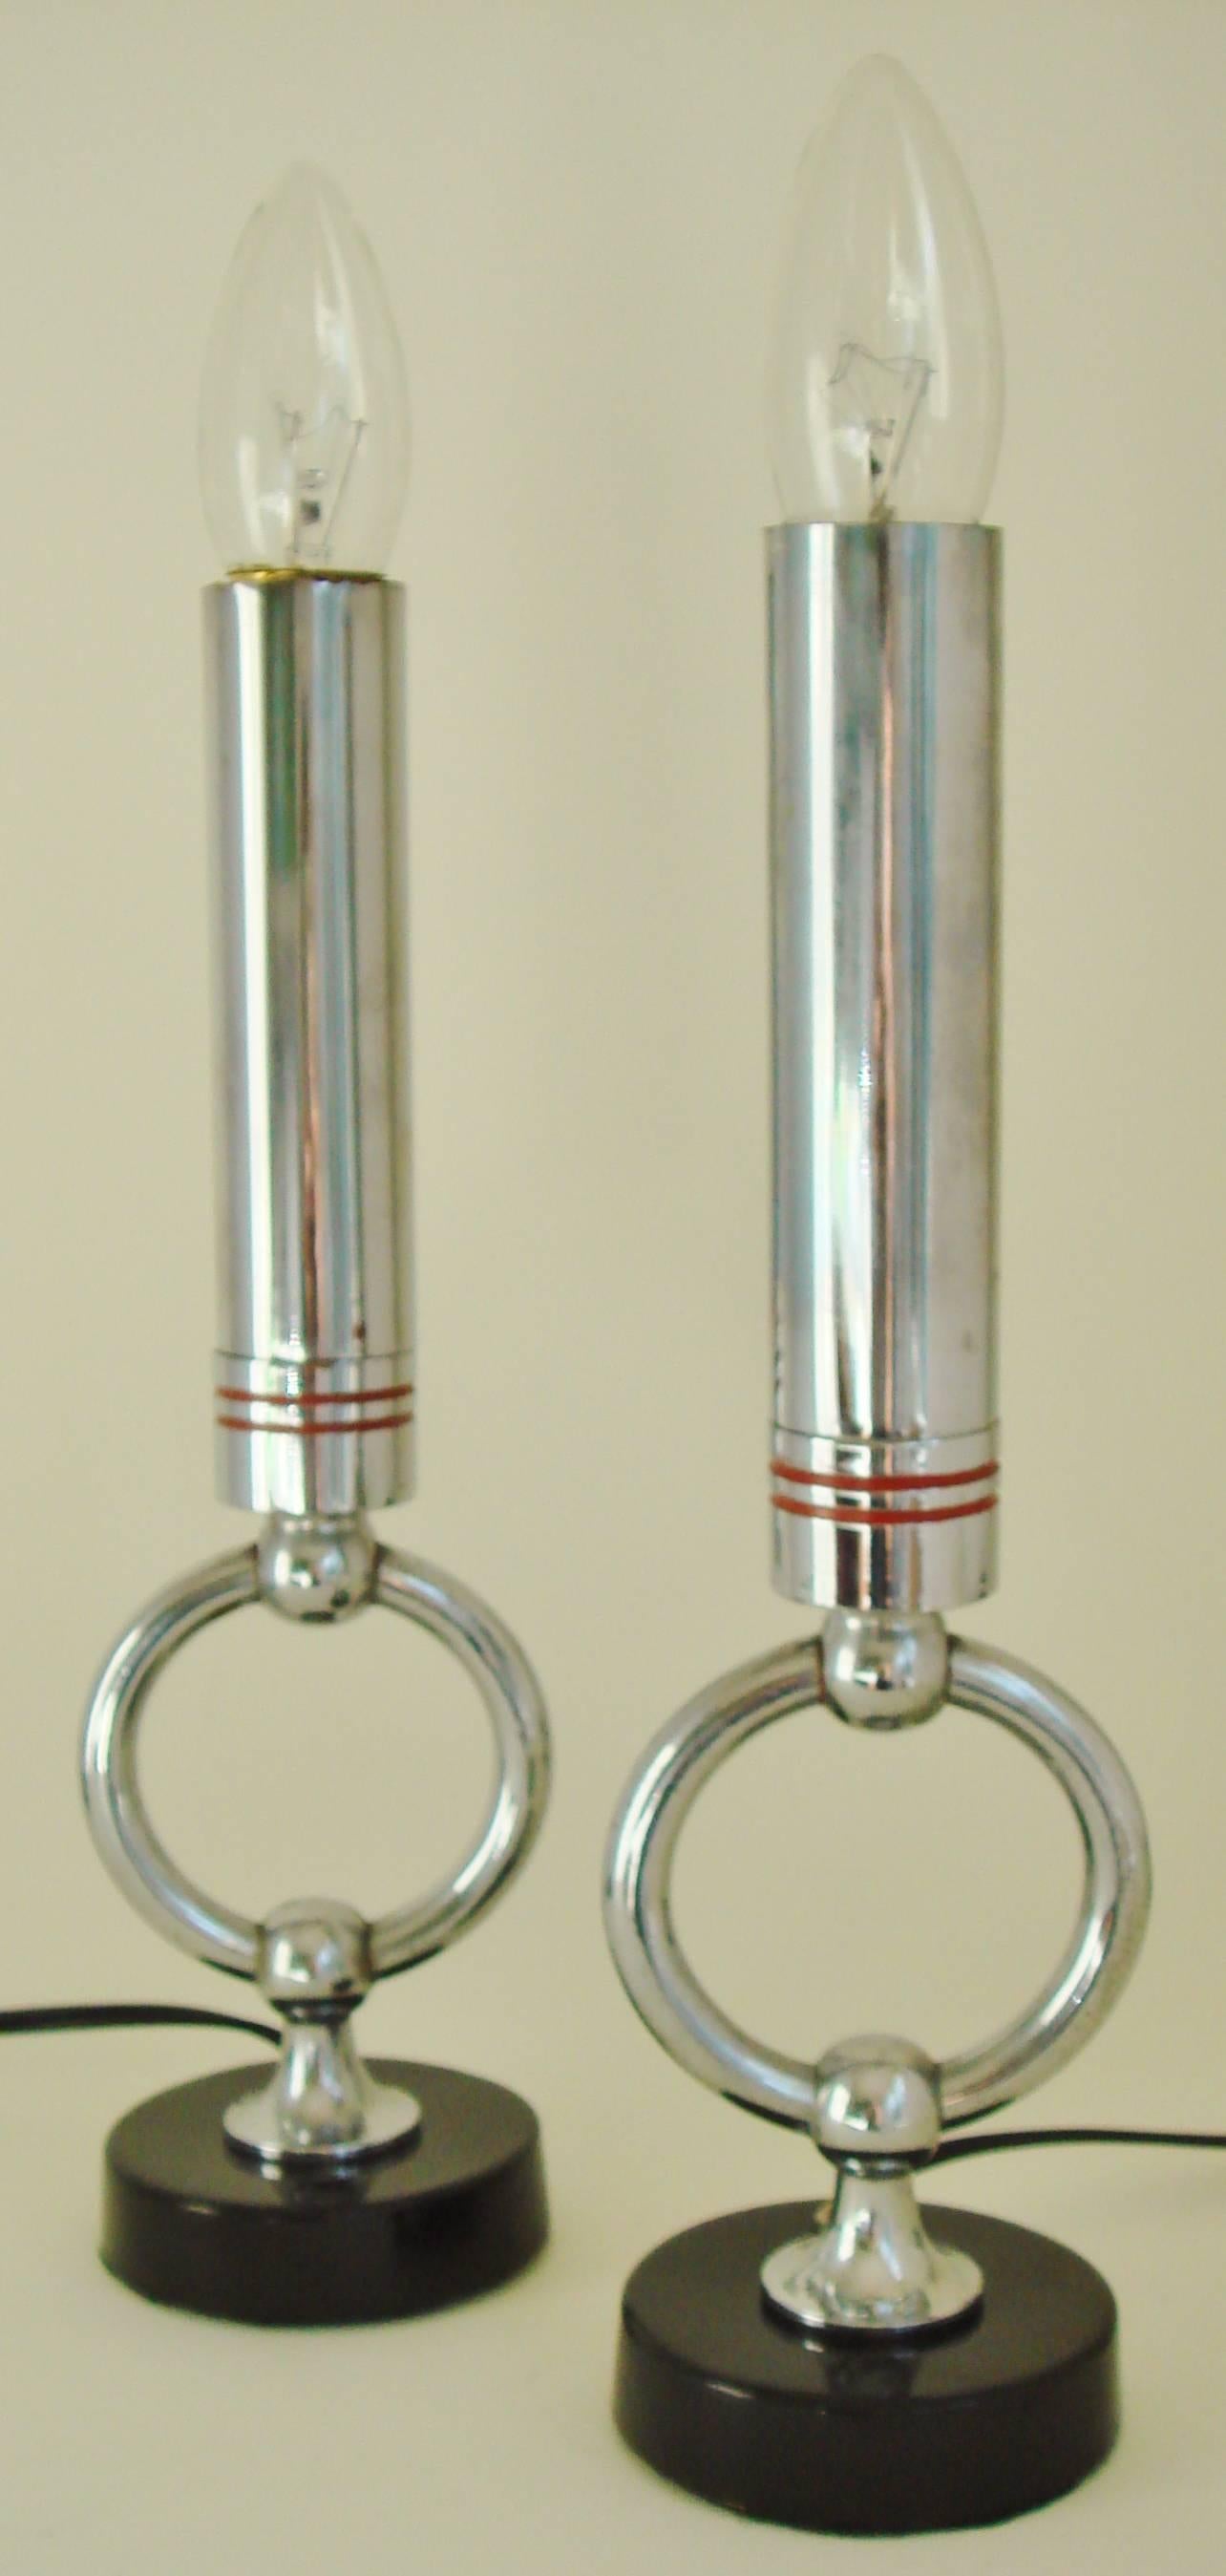 This rare and stylish pair of American Art Deco electric candlestick lamps each feature a polished chrome tube as the body of the candle resting on a socket base that is banded with two incised red enamel rings. This is mounted to a vertically